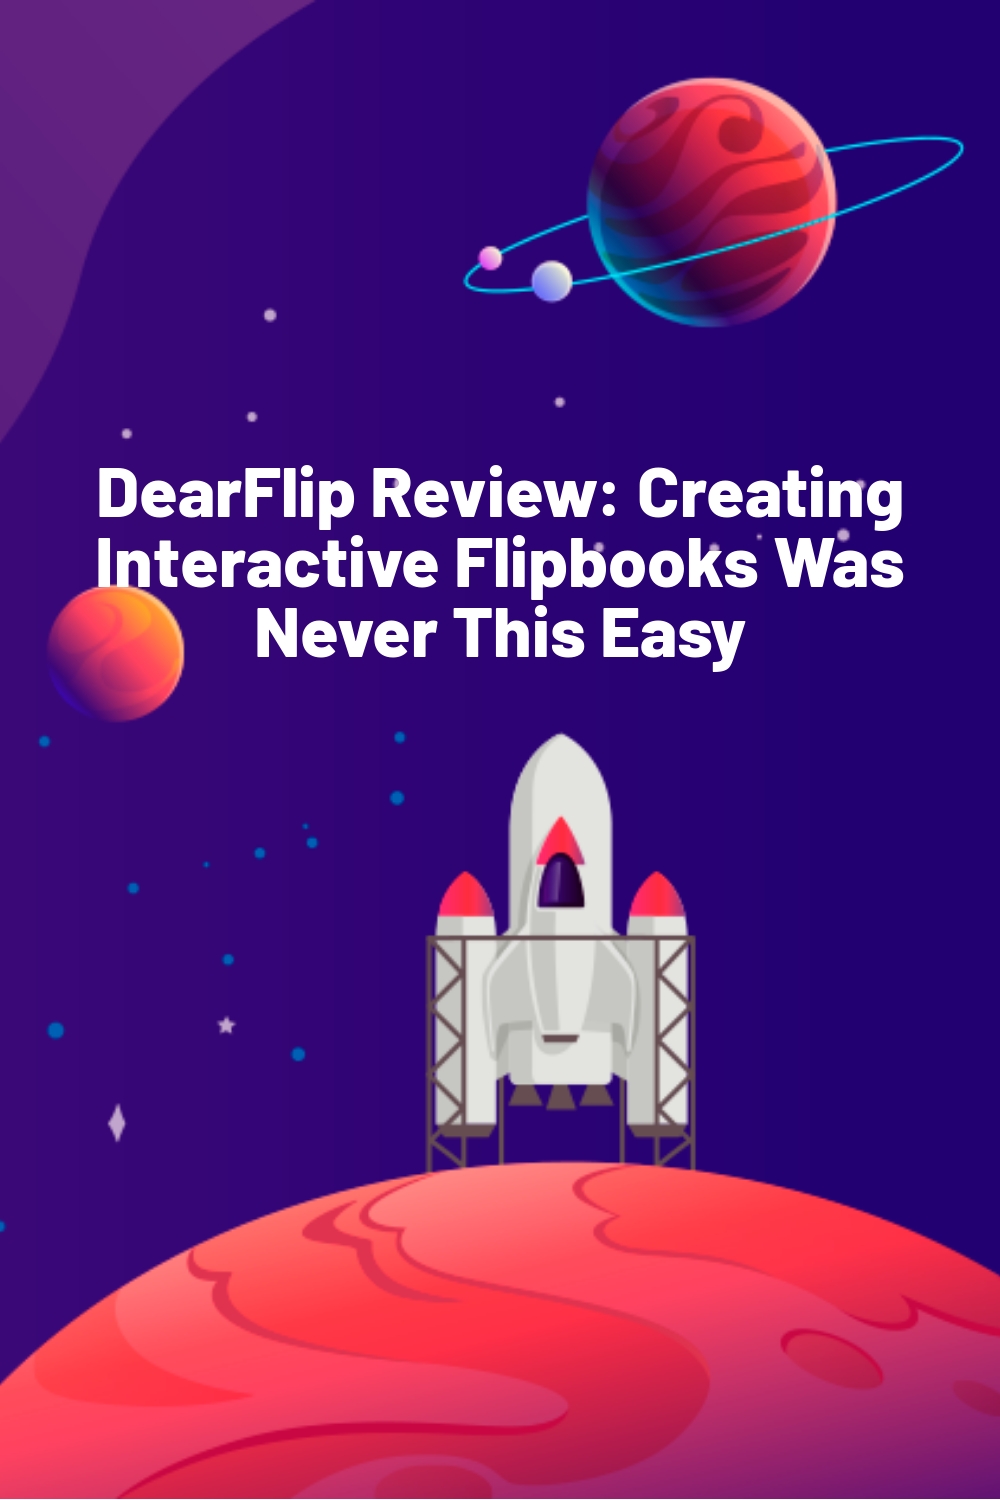 DearFlip Review: Creating Interactive Flipbooks Was Never This Easy